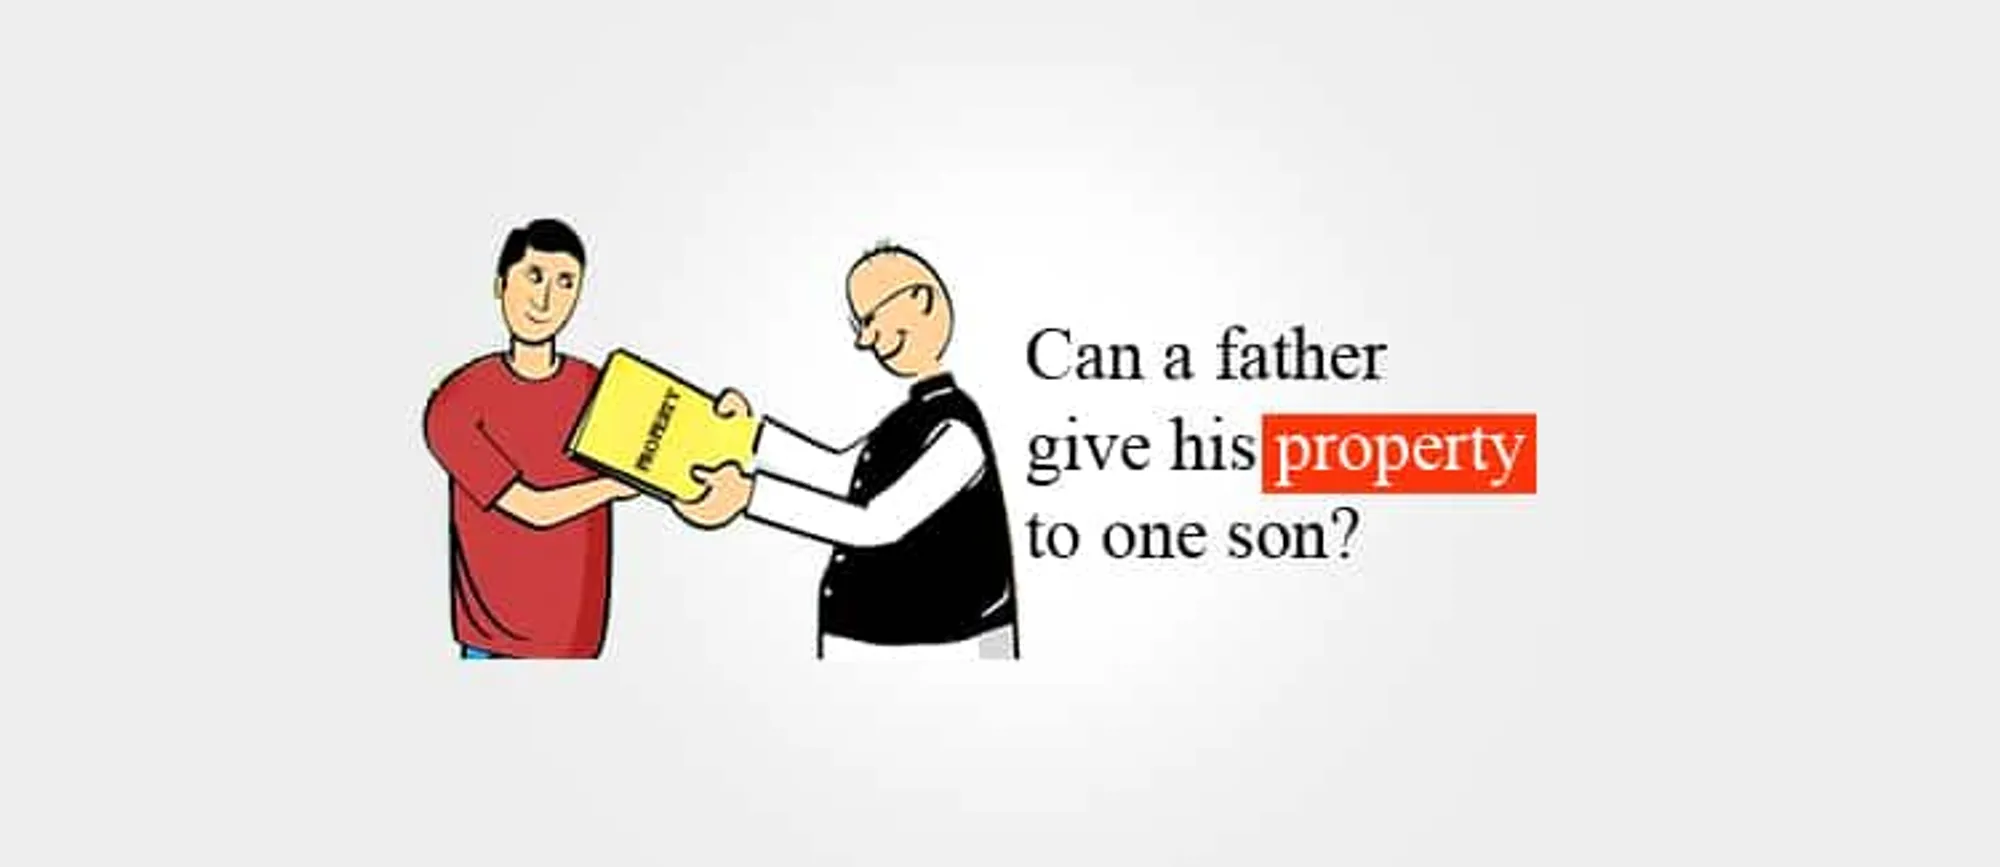 Can a father give his property to one son